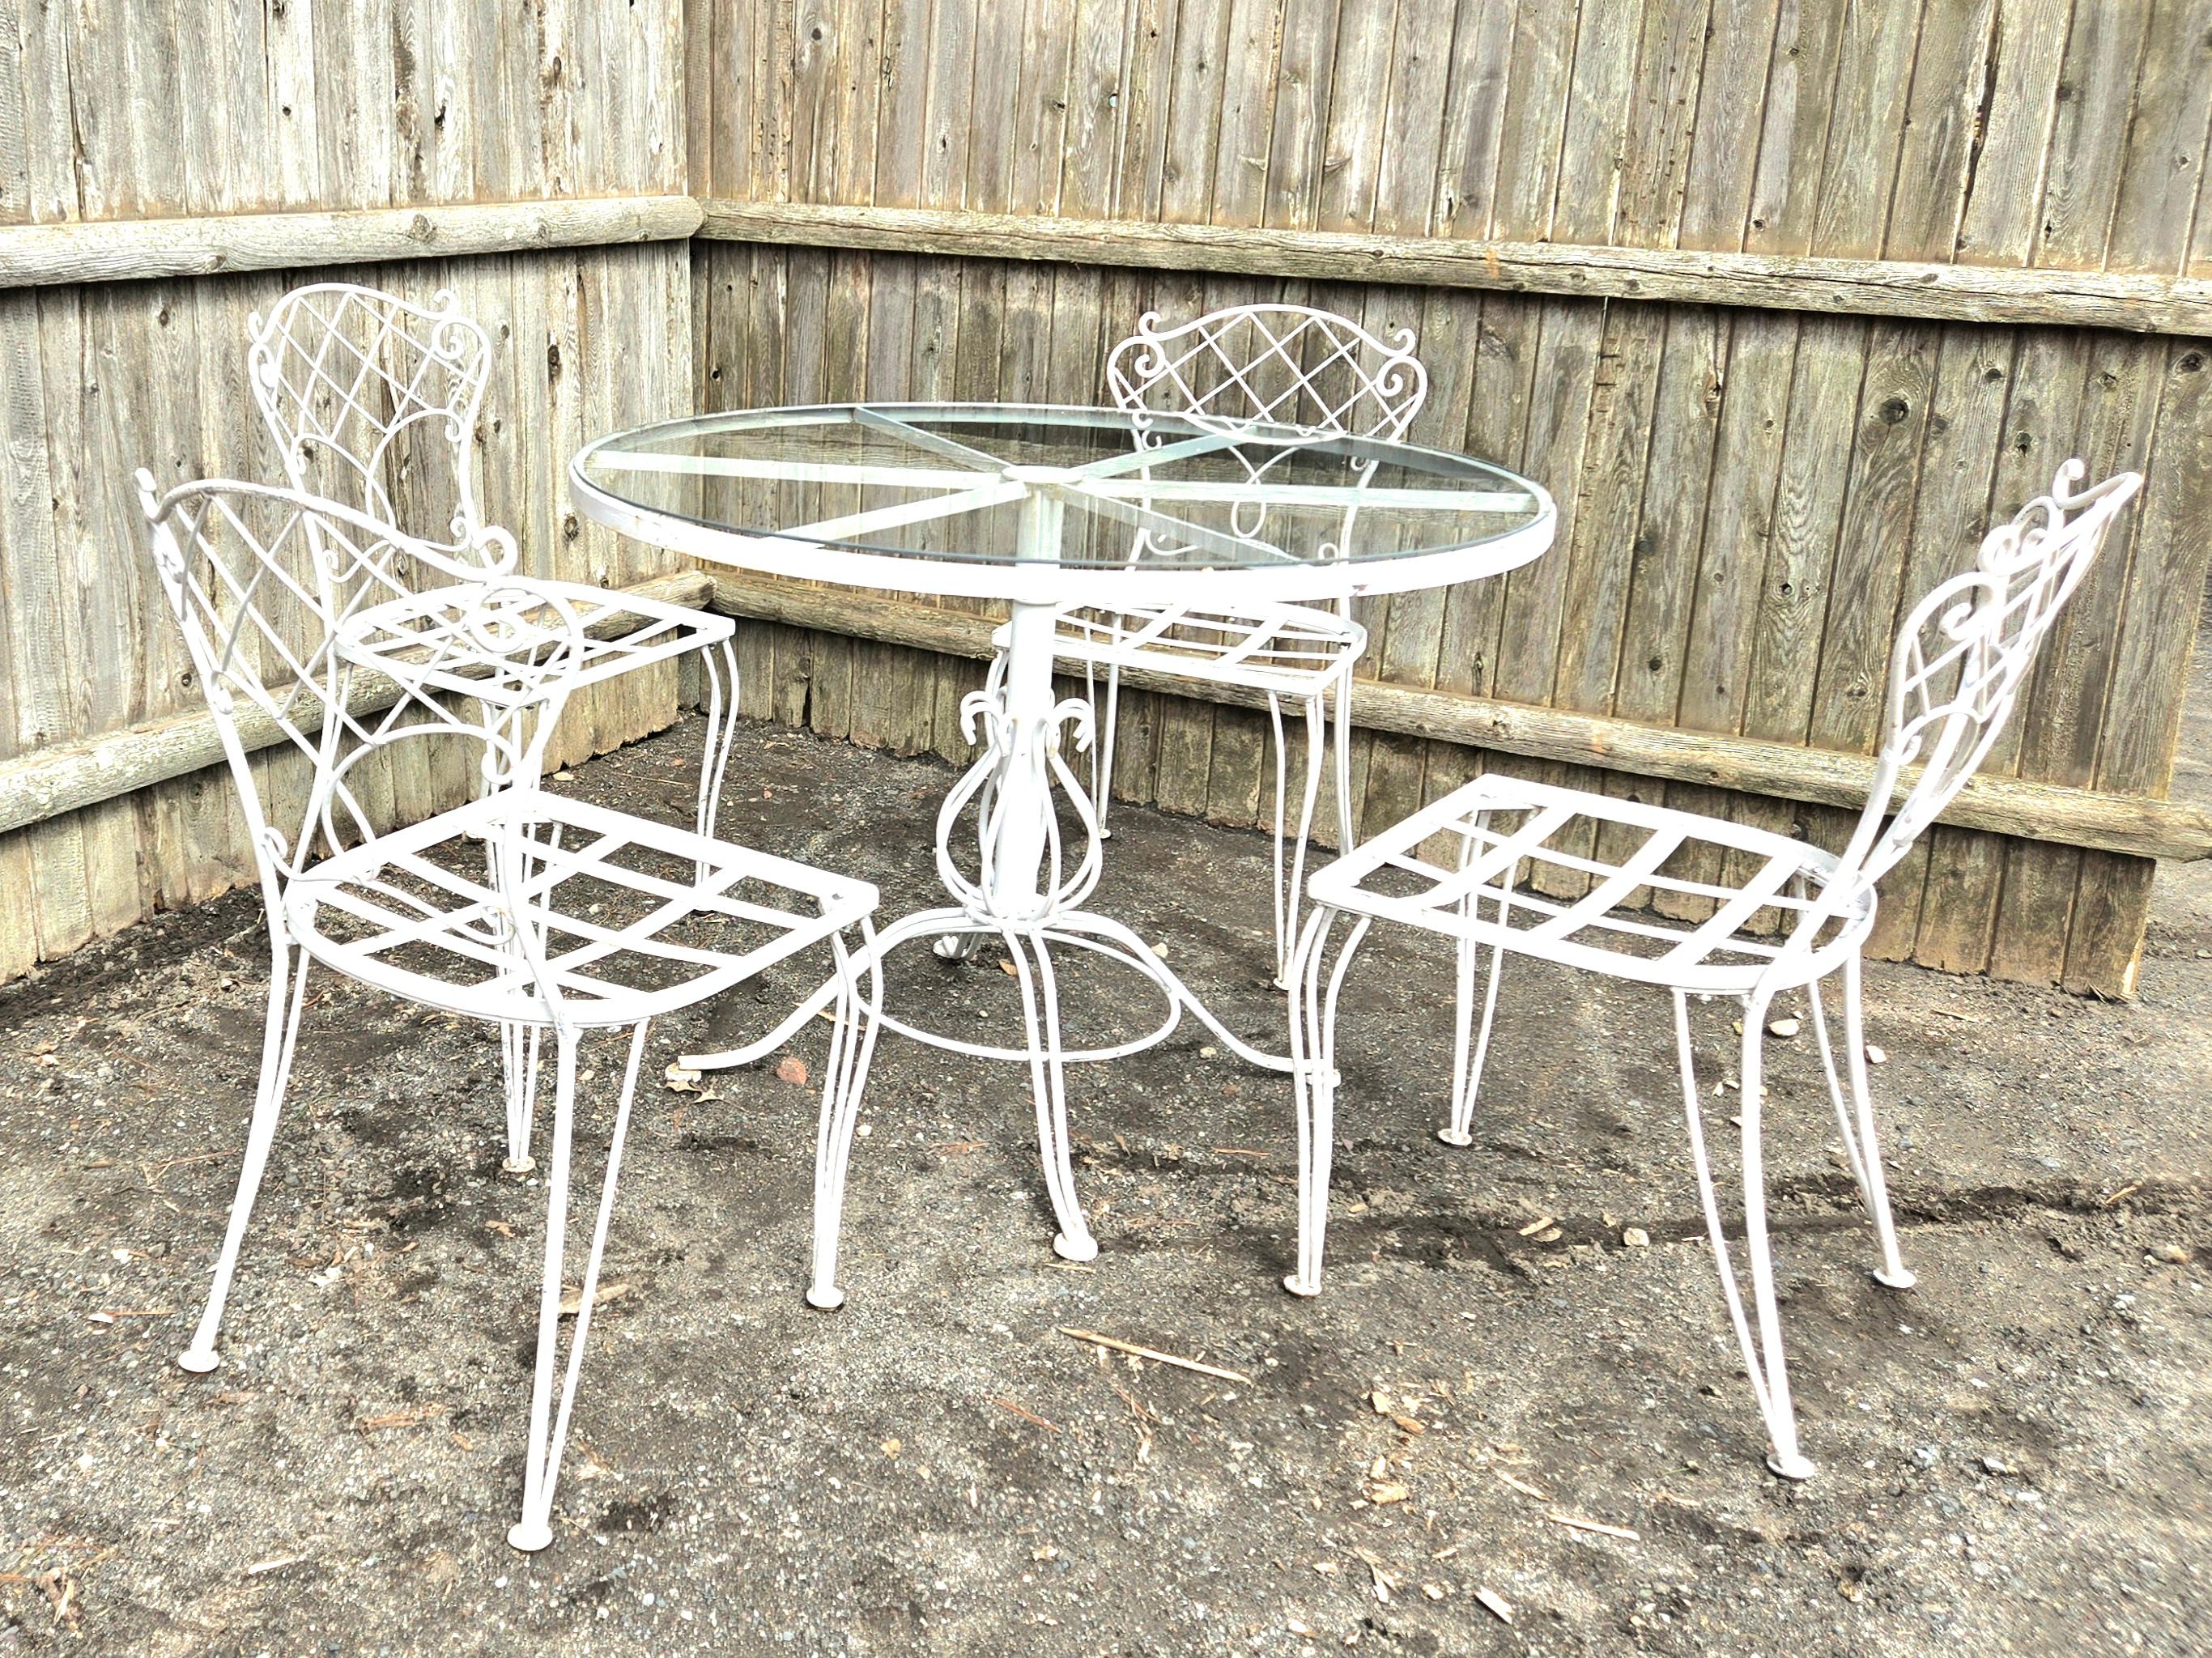 Mid-20th Century Vintage Wrought Iron Outdoor Patio Dining Set For Sale